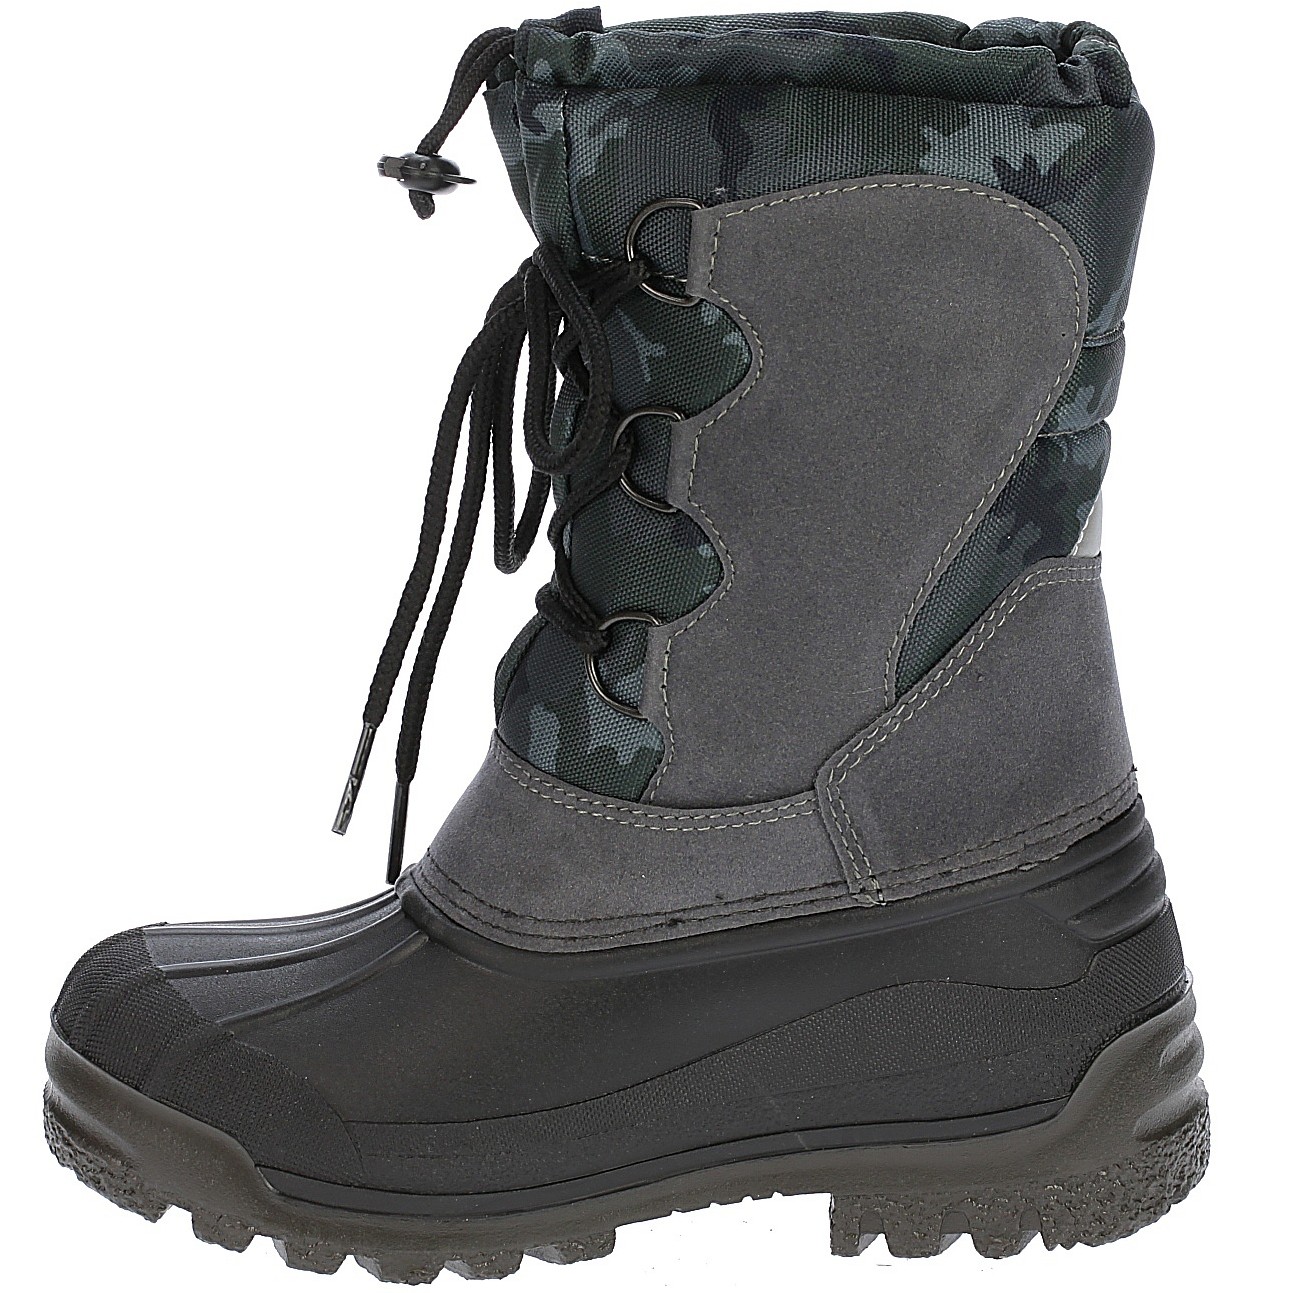 Olang Canadian Winter Snow Boots